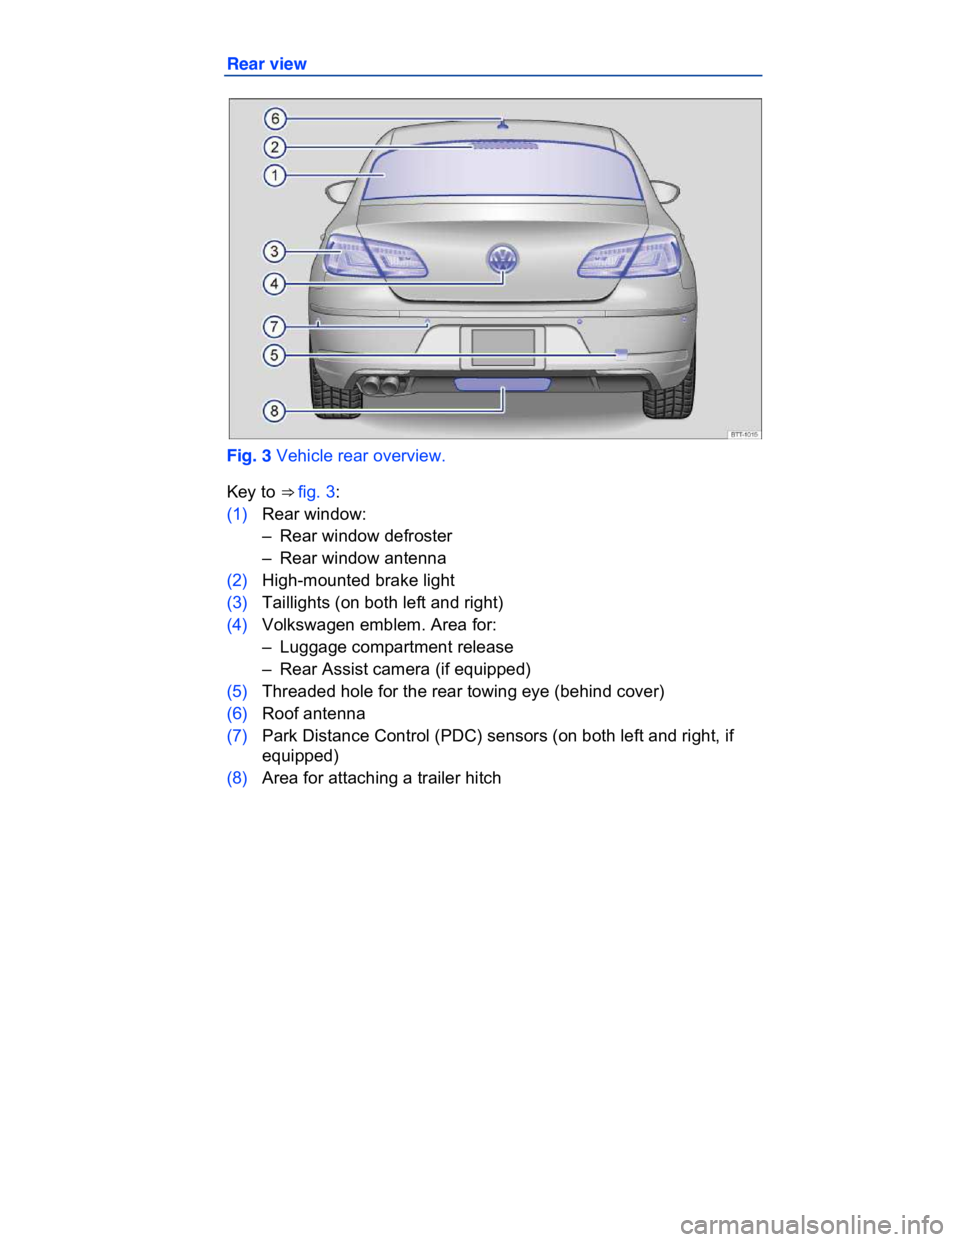 VOLKSWAGEN CC 2012  Owners Manual  
Rear view 
 
Fig. 3 Vehicle rear overview. 
Key to ⇒ fig. 3: 
(1) Rear window: 
–  Rear window defroster  
–  Rear window antenna  
(2) High-mounted brake light 
(3) Taillights (on both left